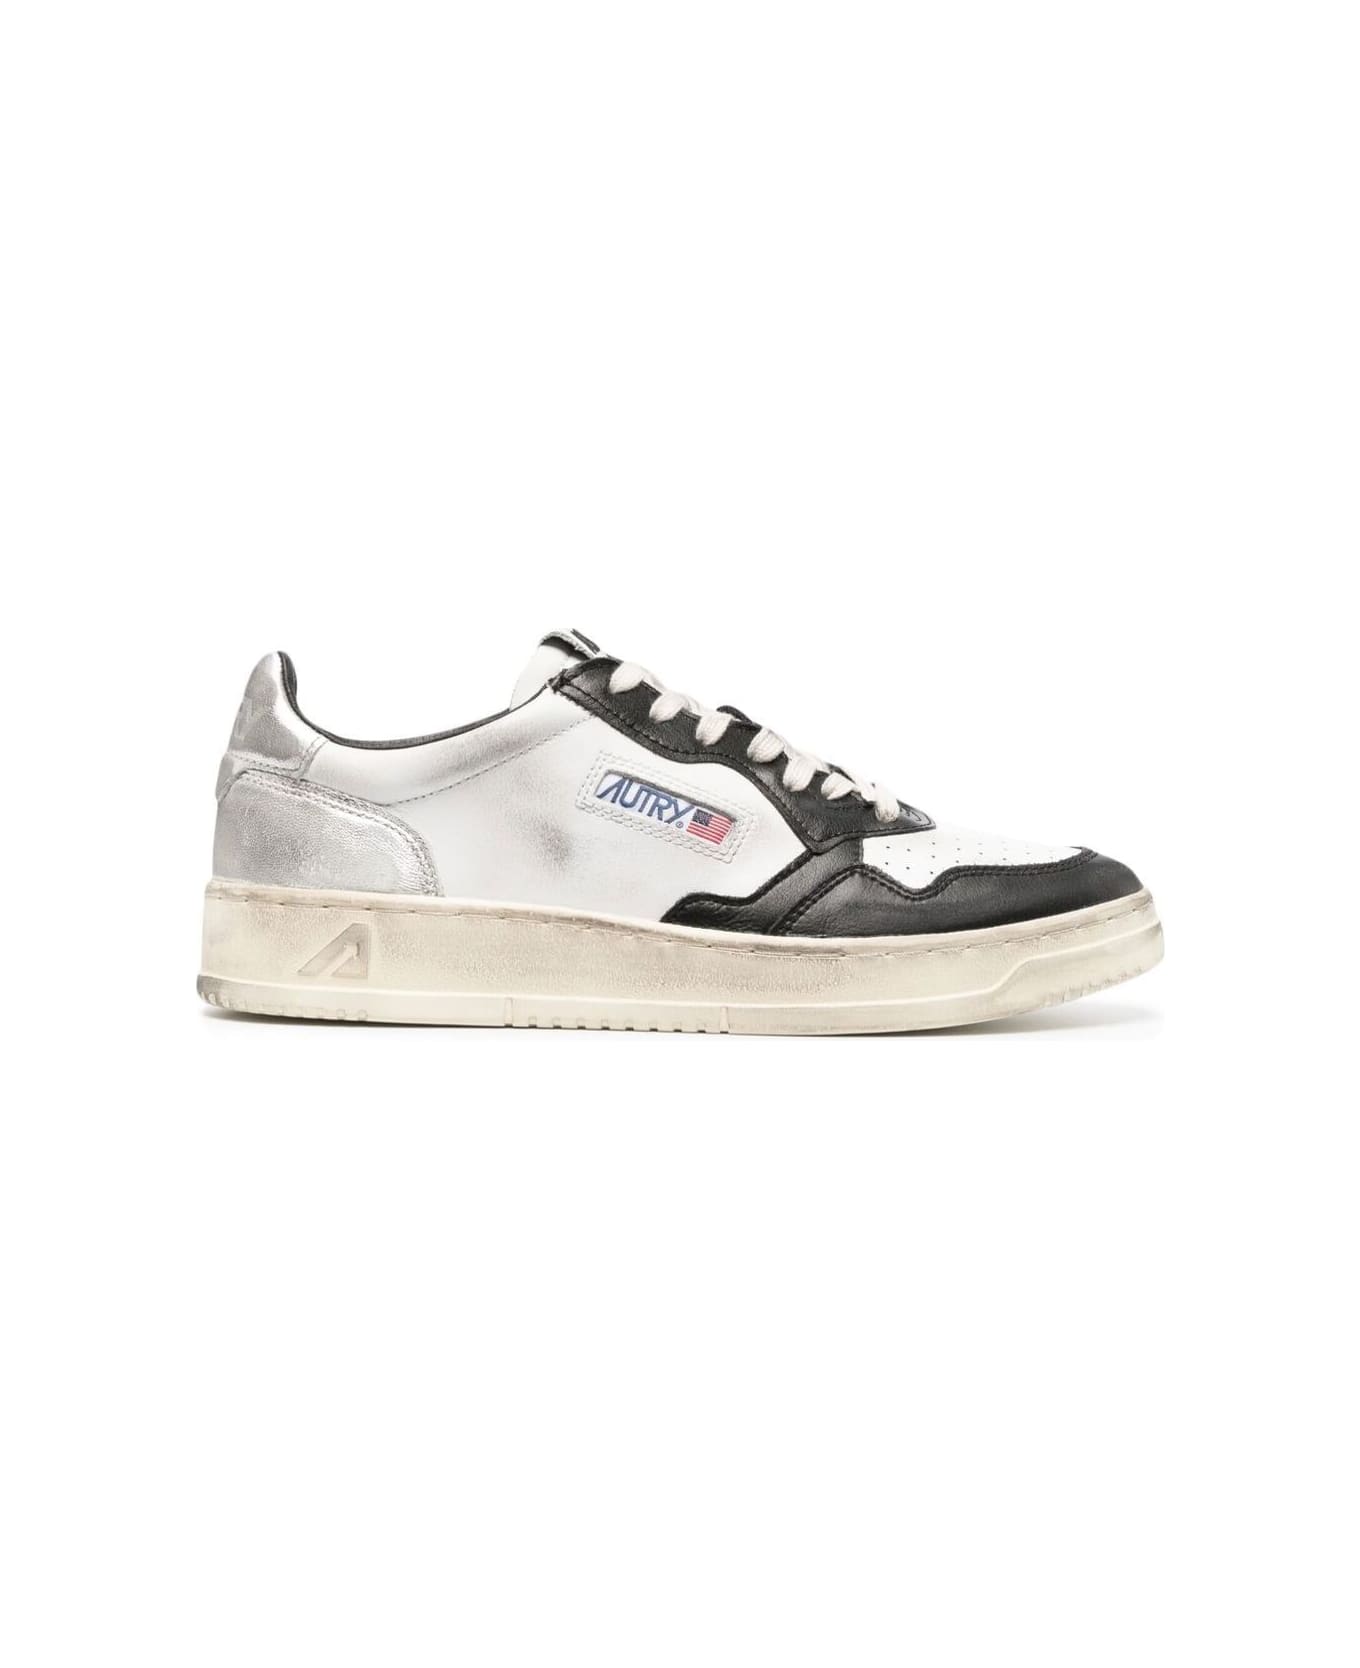 Autry Black And White 'medalist' Low Top Sneakers Distressed Finish In Cow Leather - Multicolor